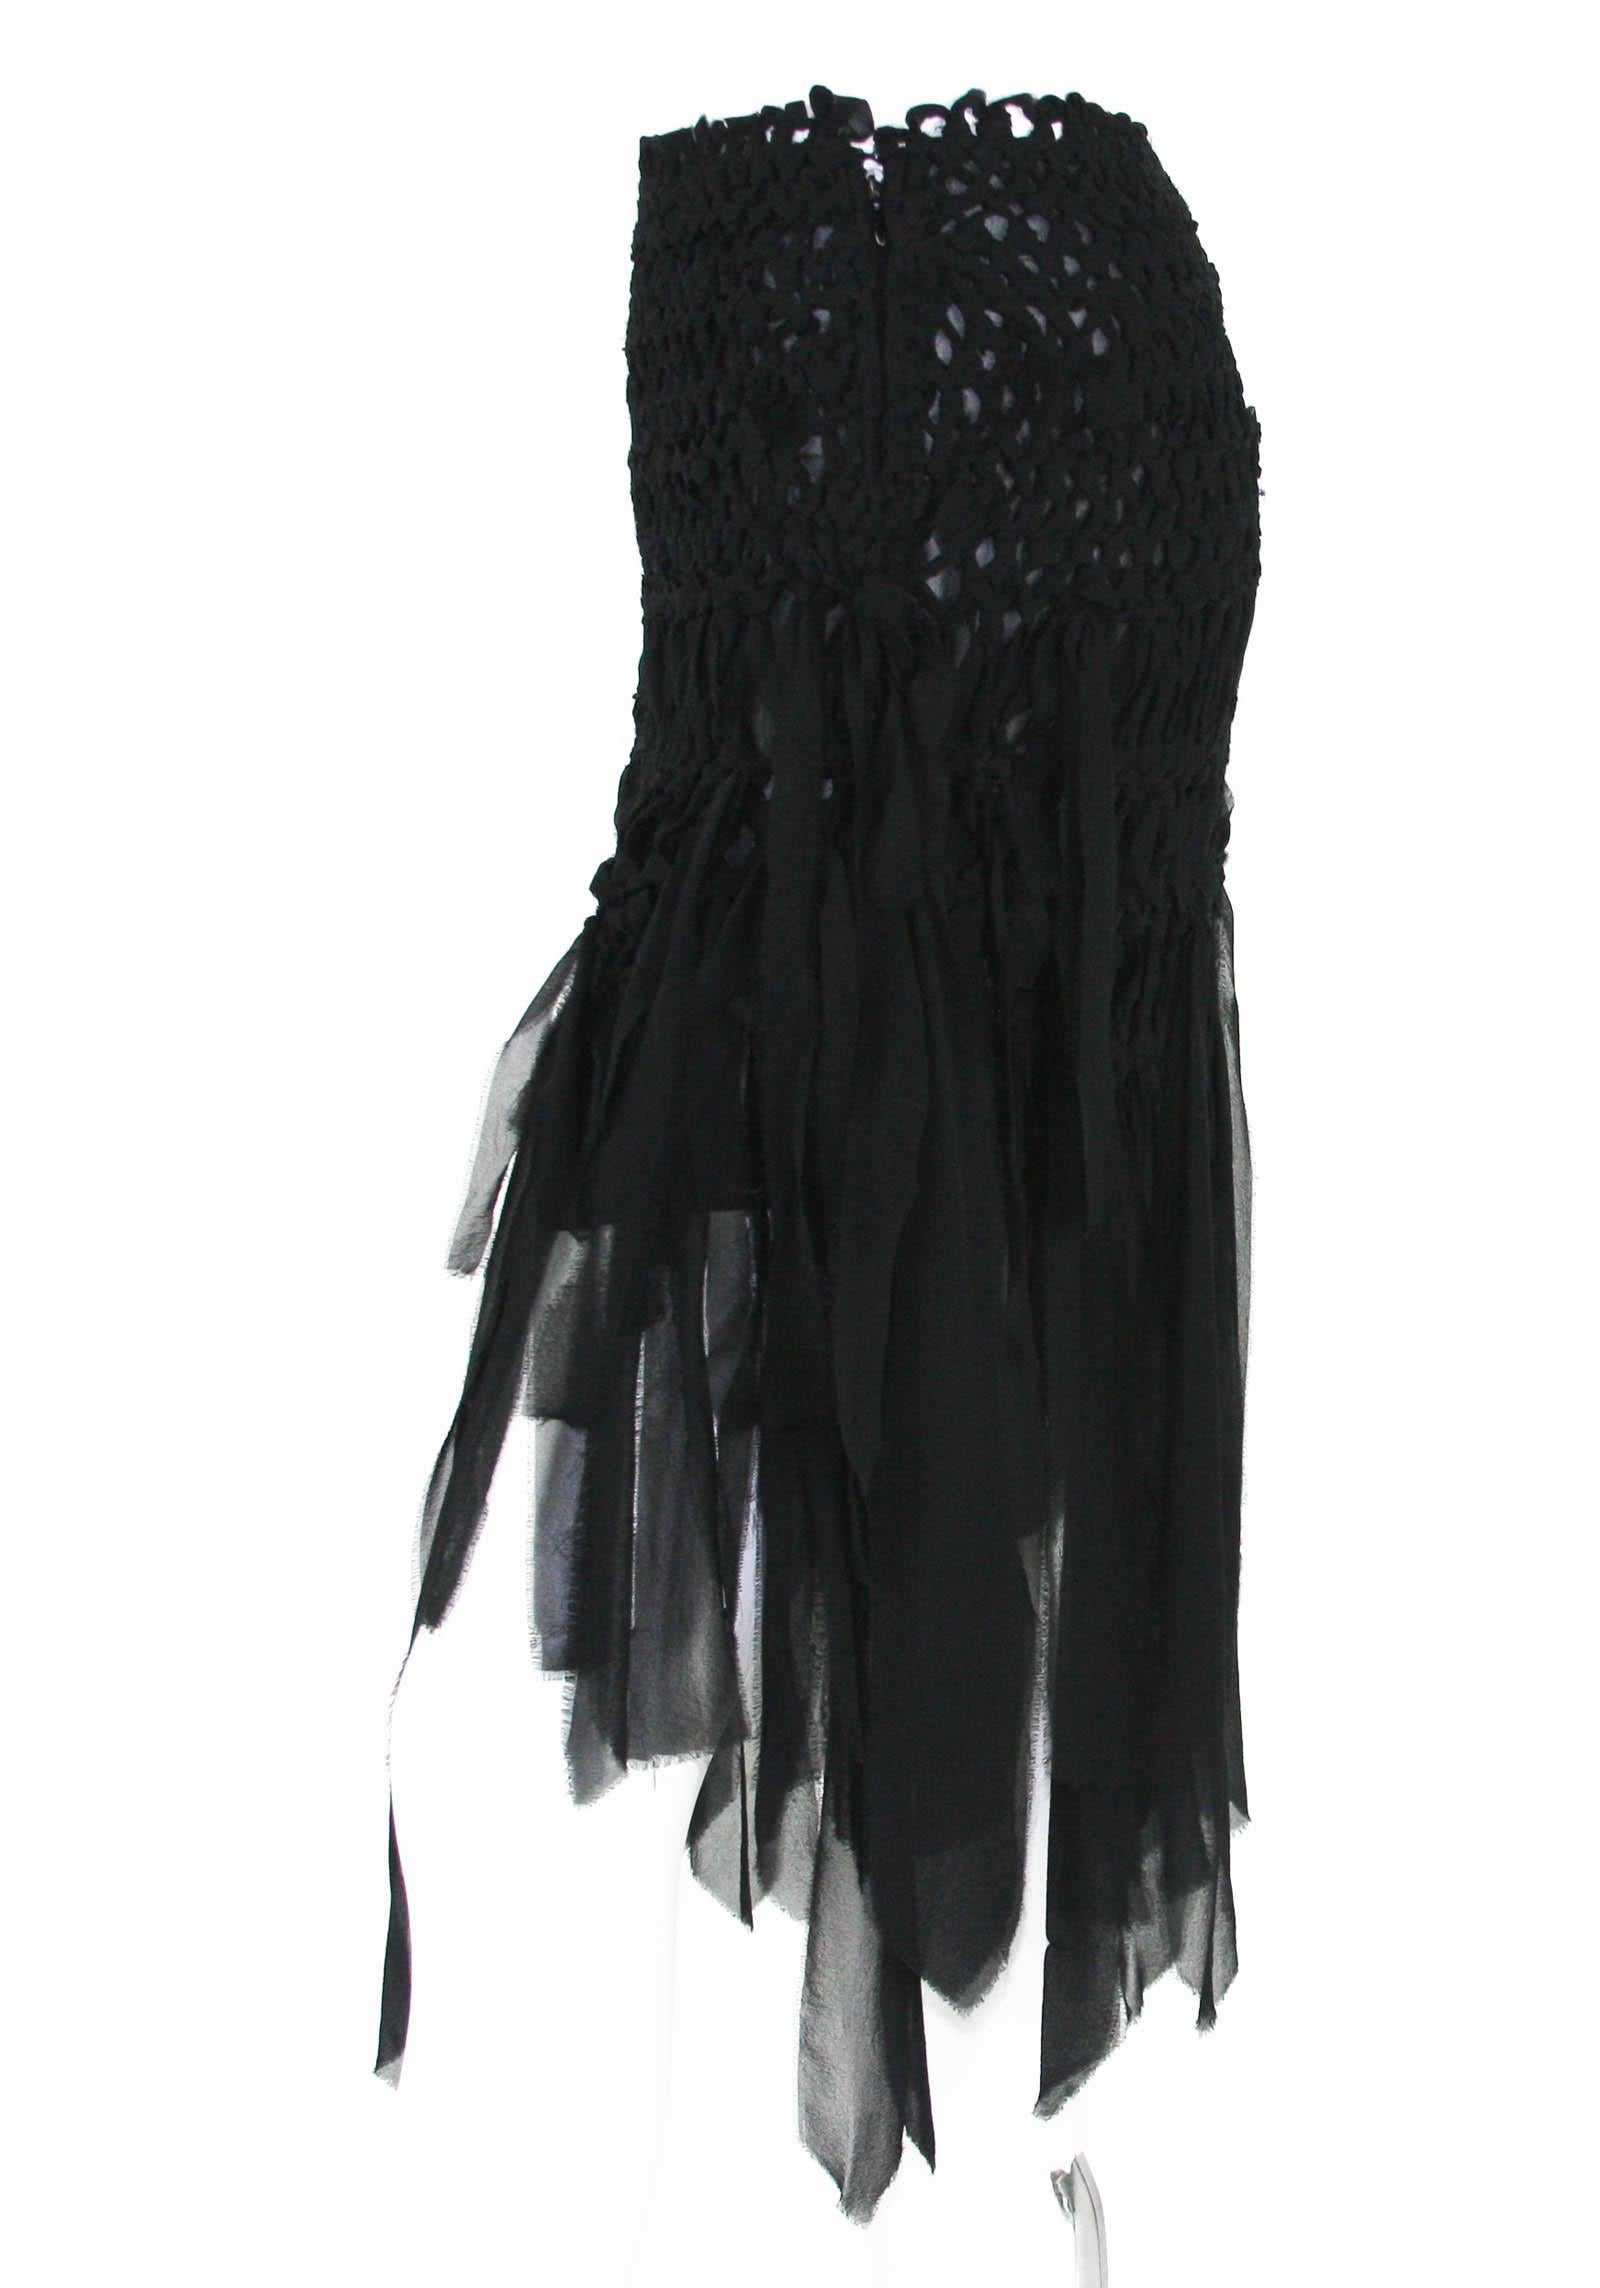 Tom Ford for Yves Saint Laurent S/S 2002 Mini Black Silk Woven Fringe Skirt S M In Excellent Condition For Sale In Montgomery, TX